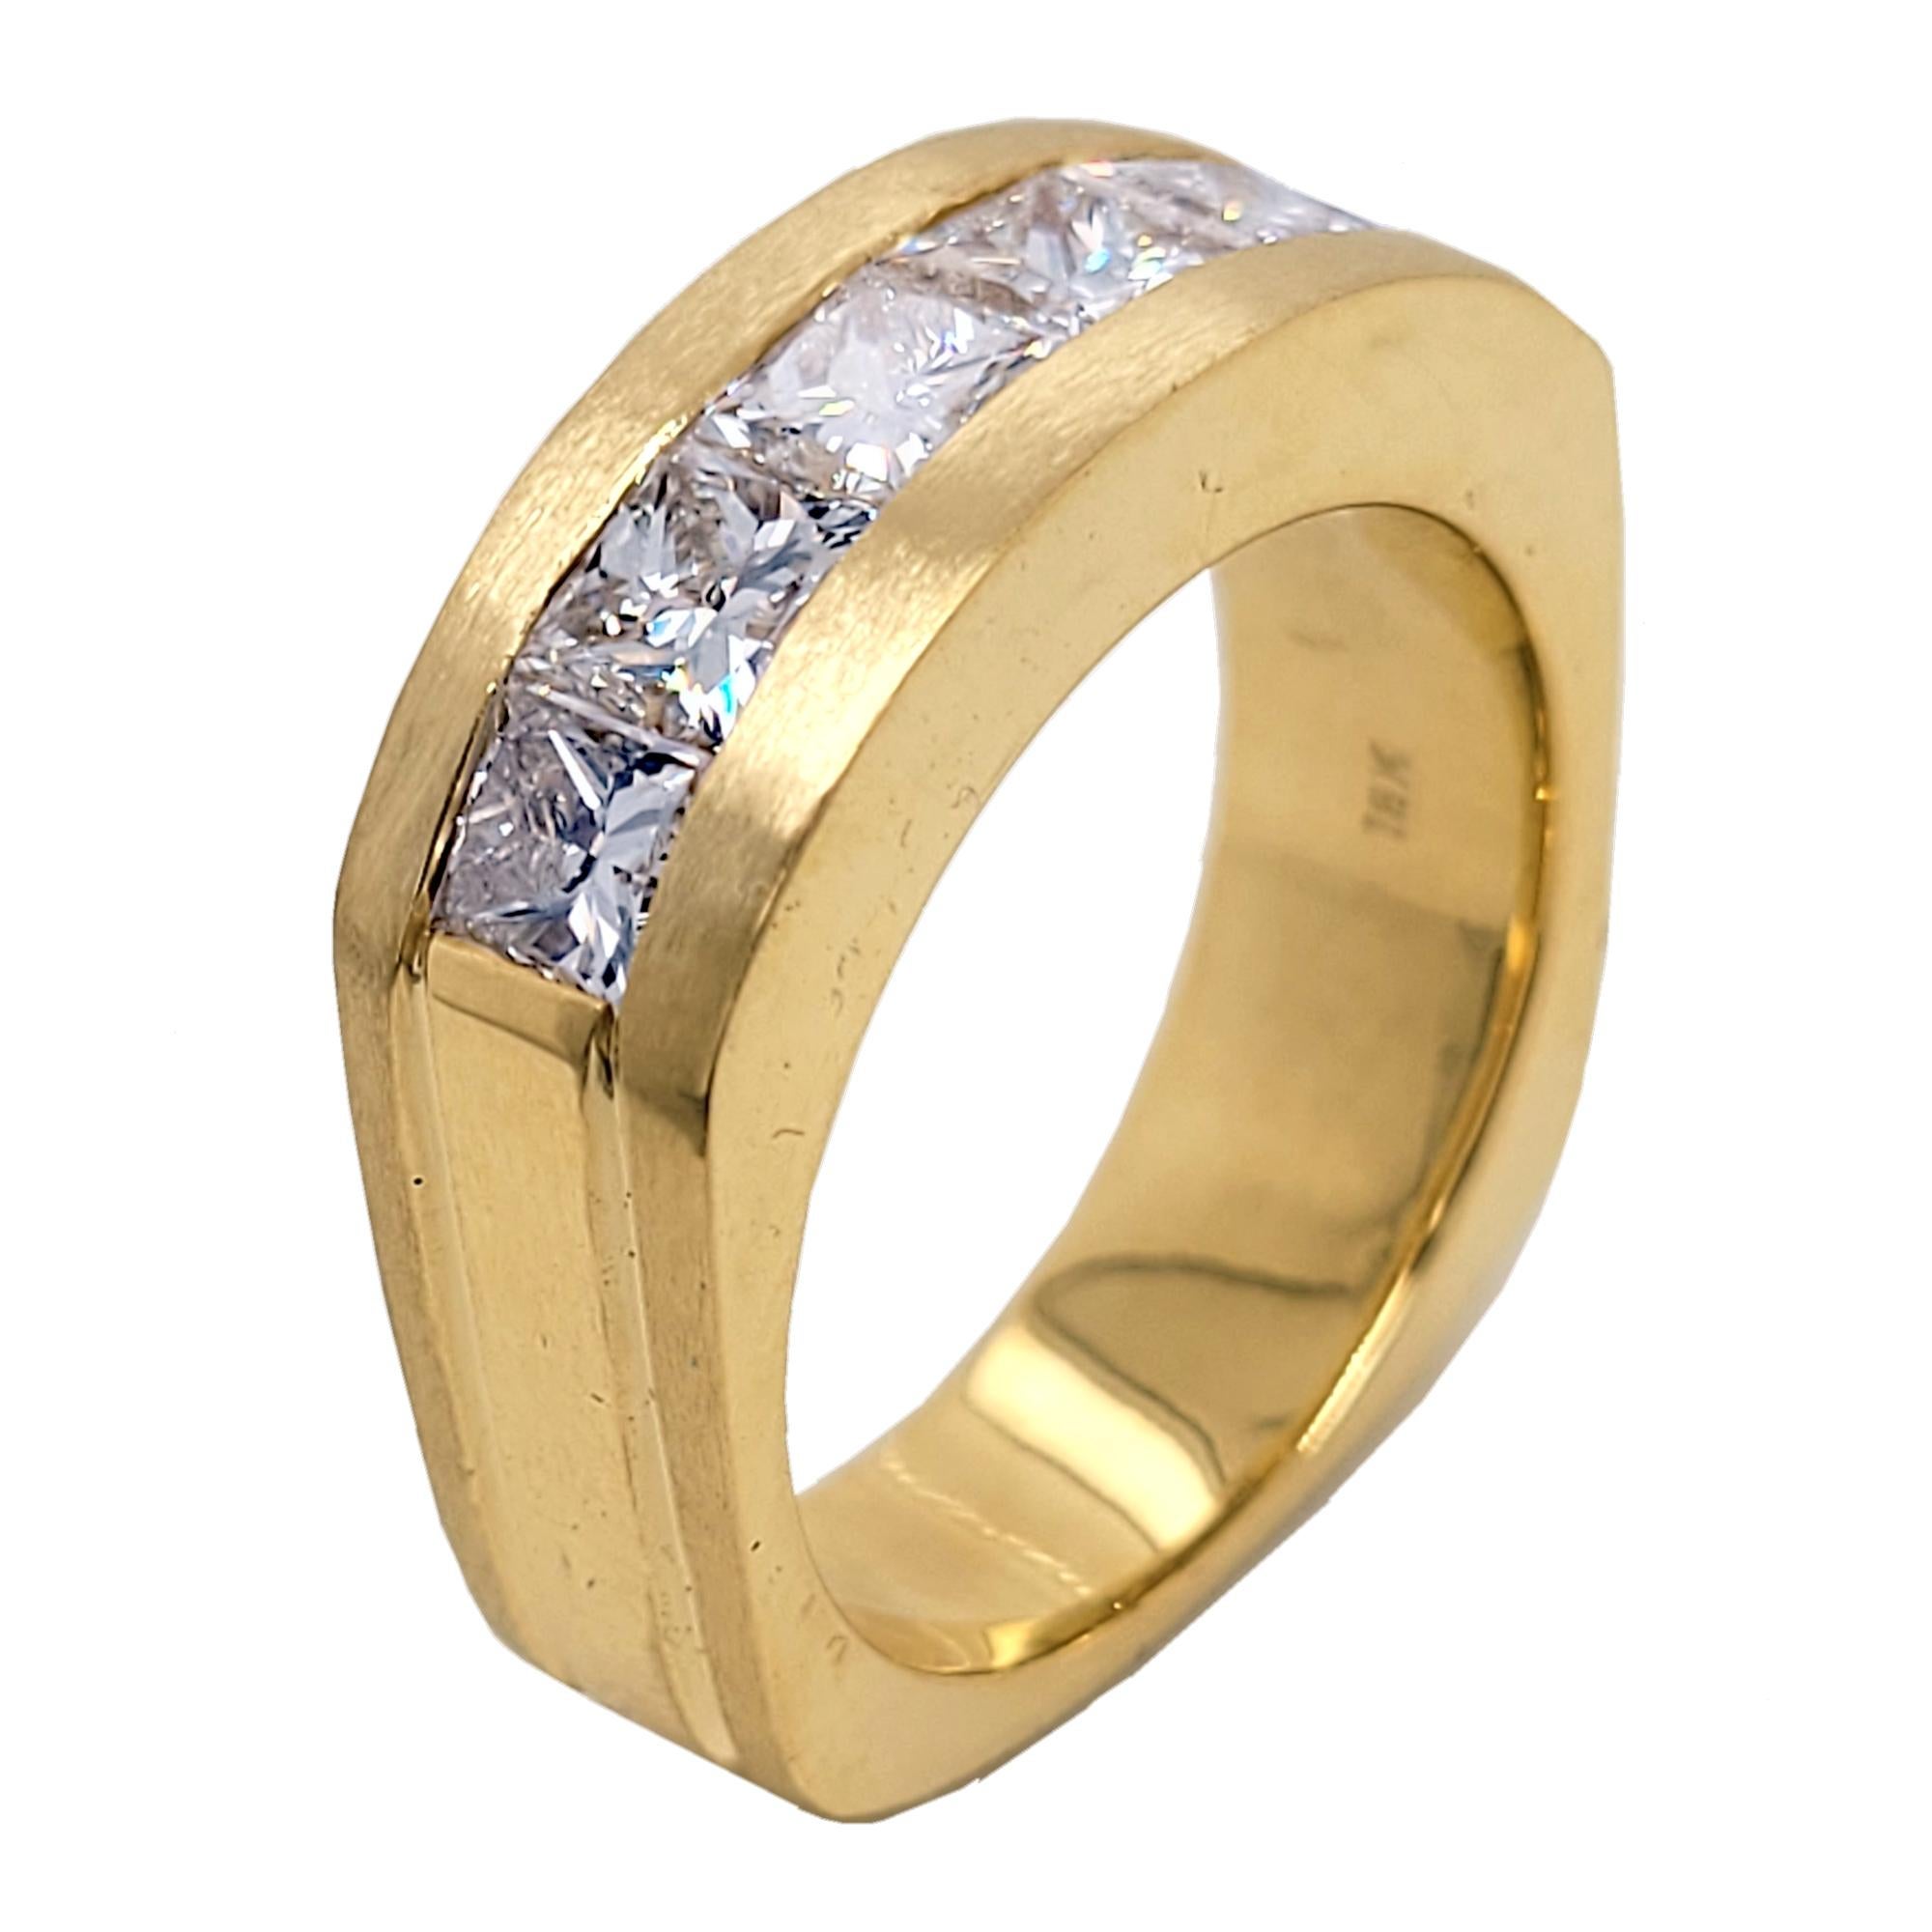 3.14 Carat Princess Cut Diamond 18 Karat Gents Ring In New Condition For Sale In Los Angeles, CA